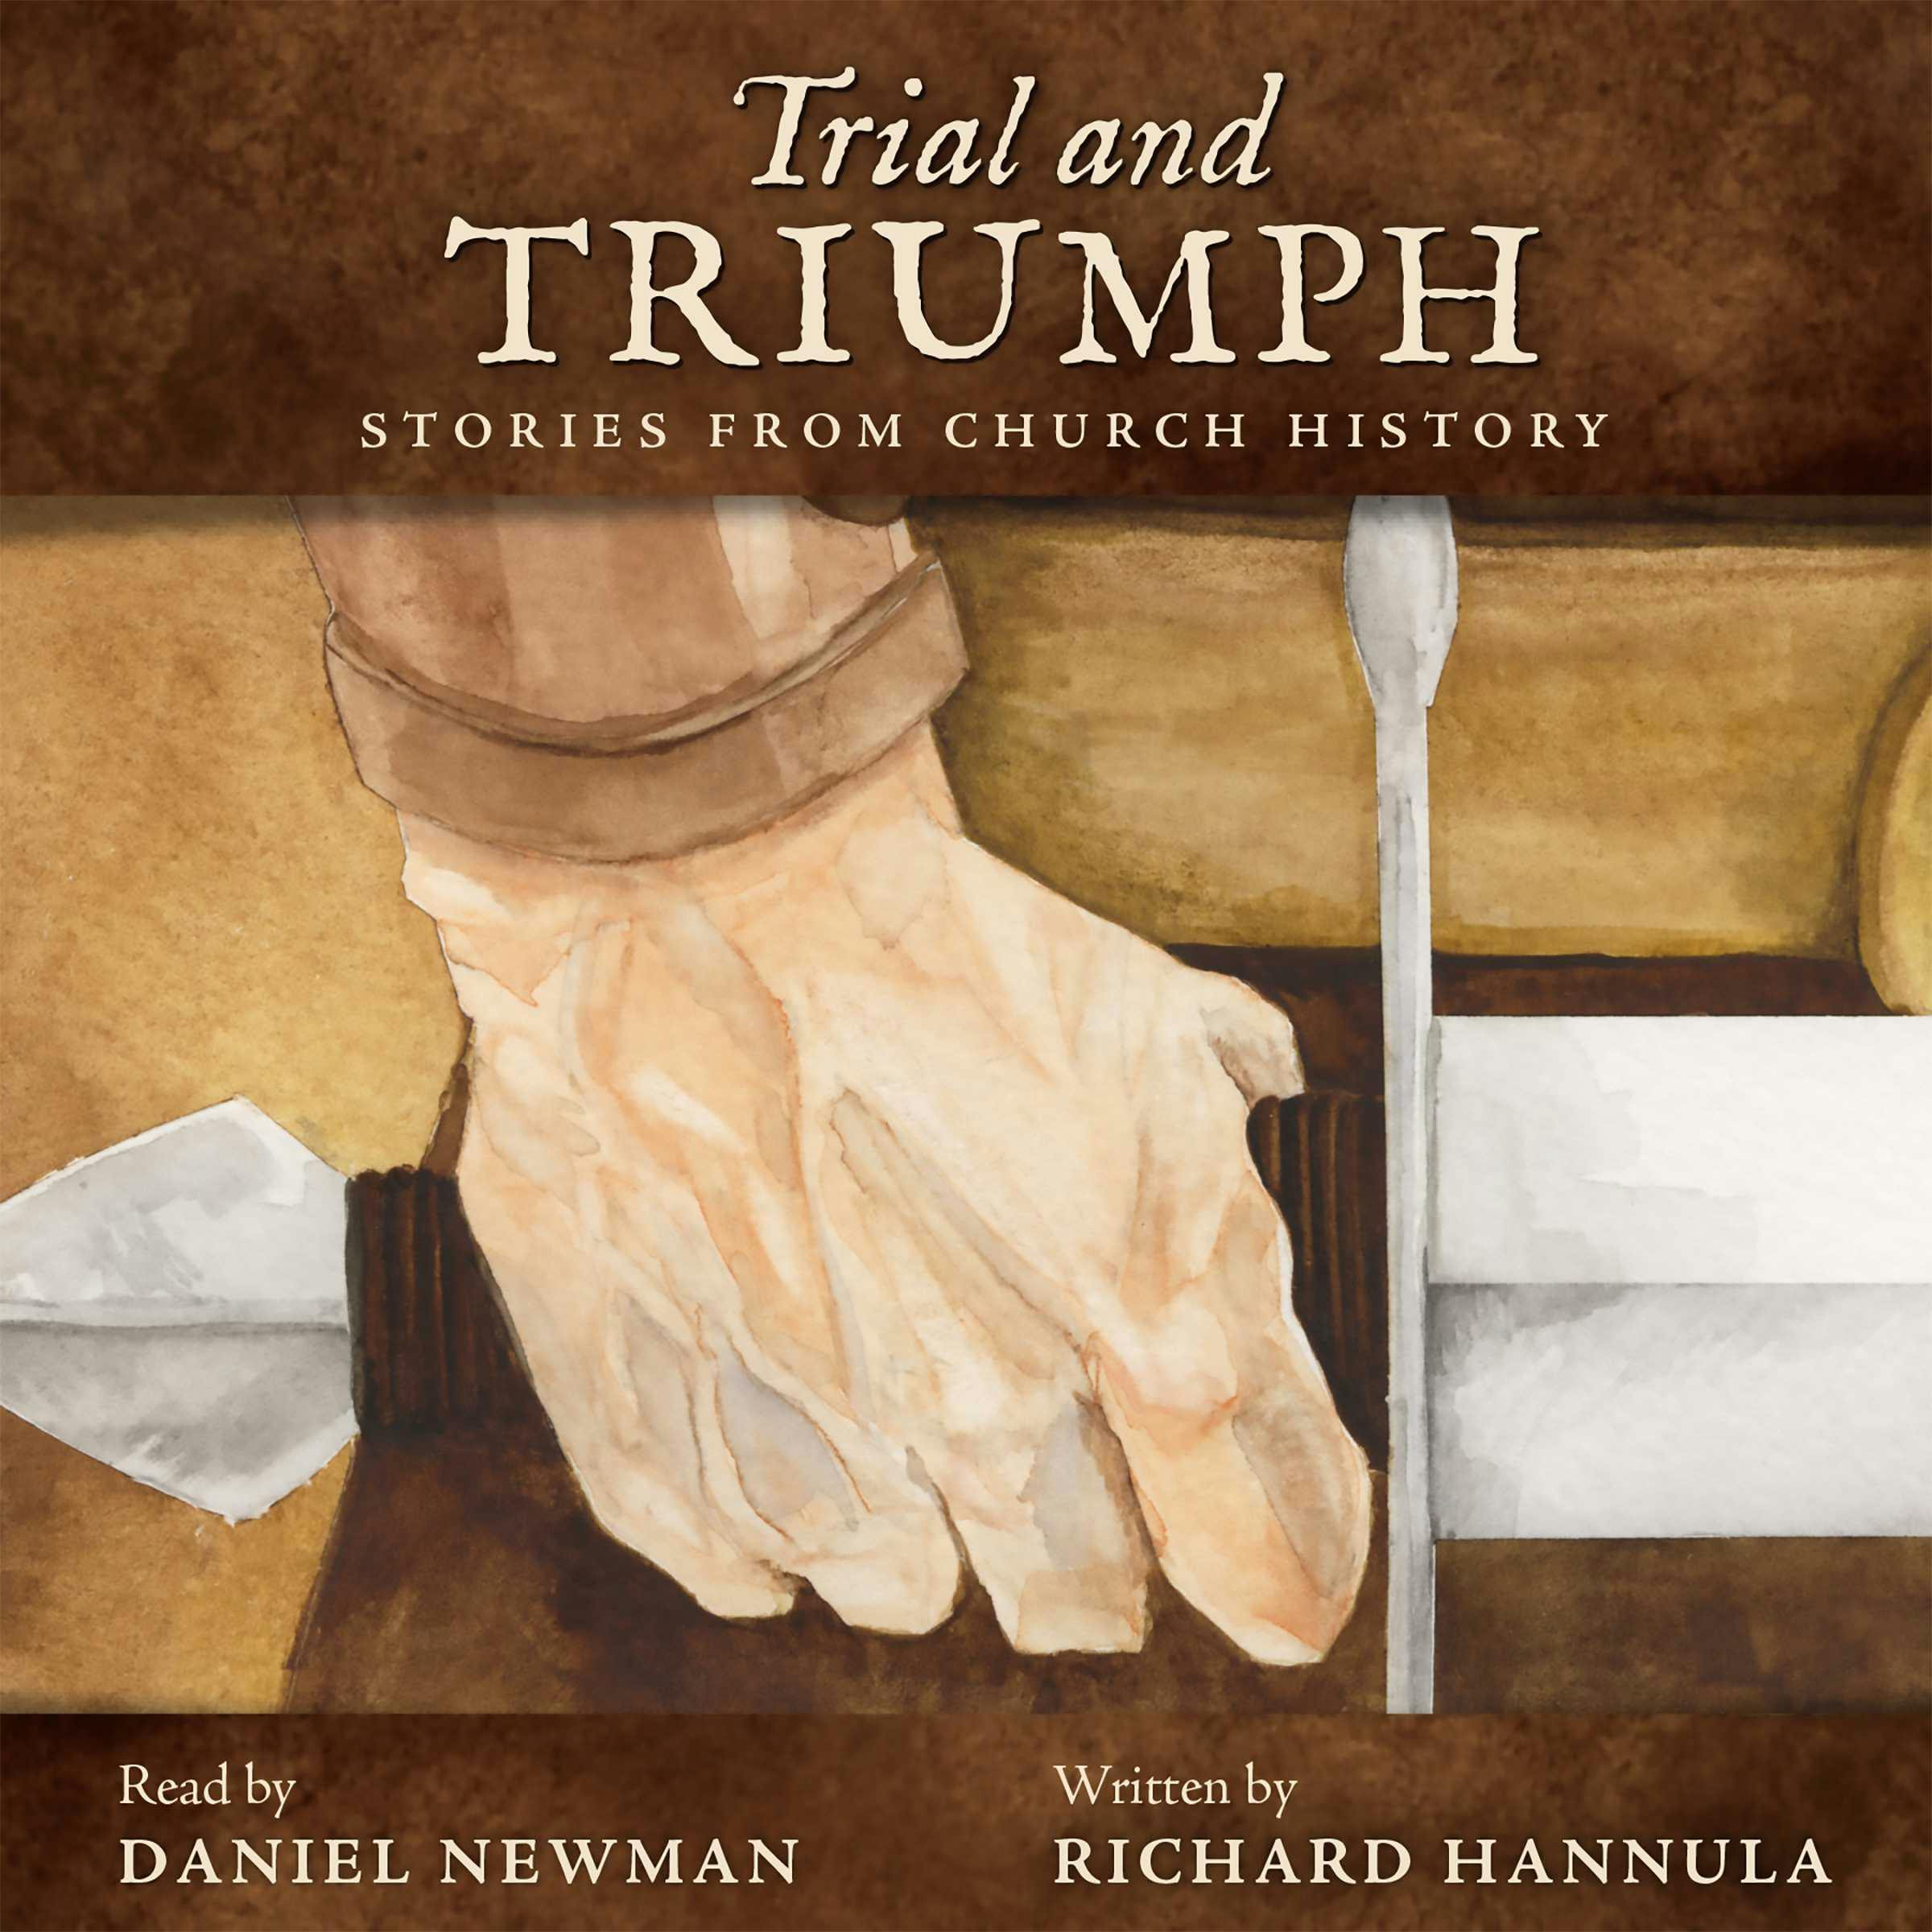 Trial and Triumph: Stories from Church History - Richard Hannula